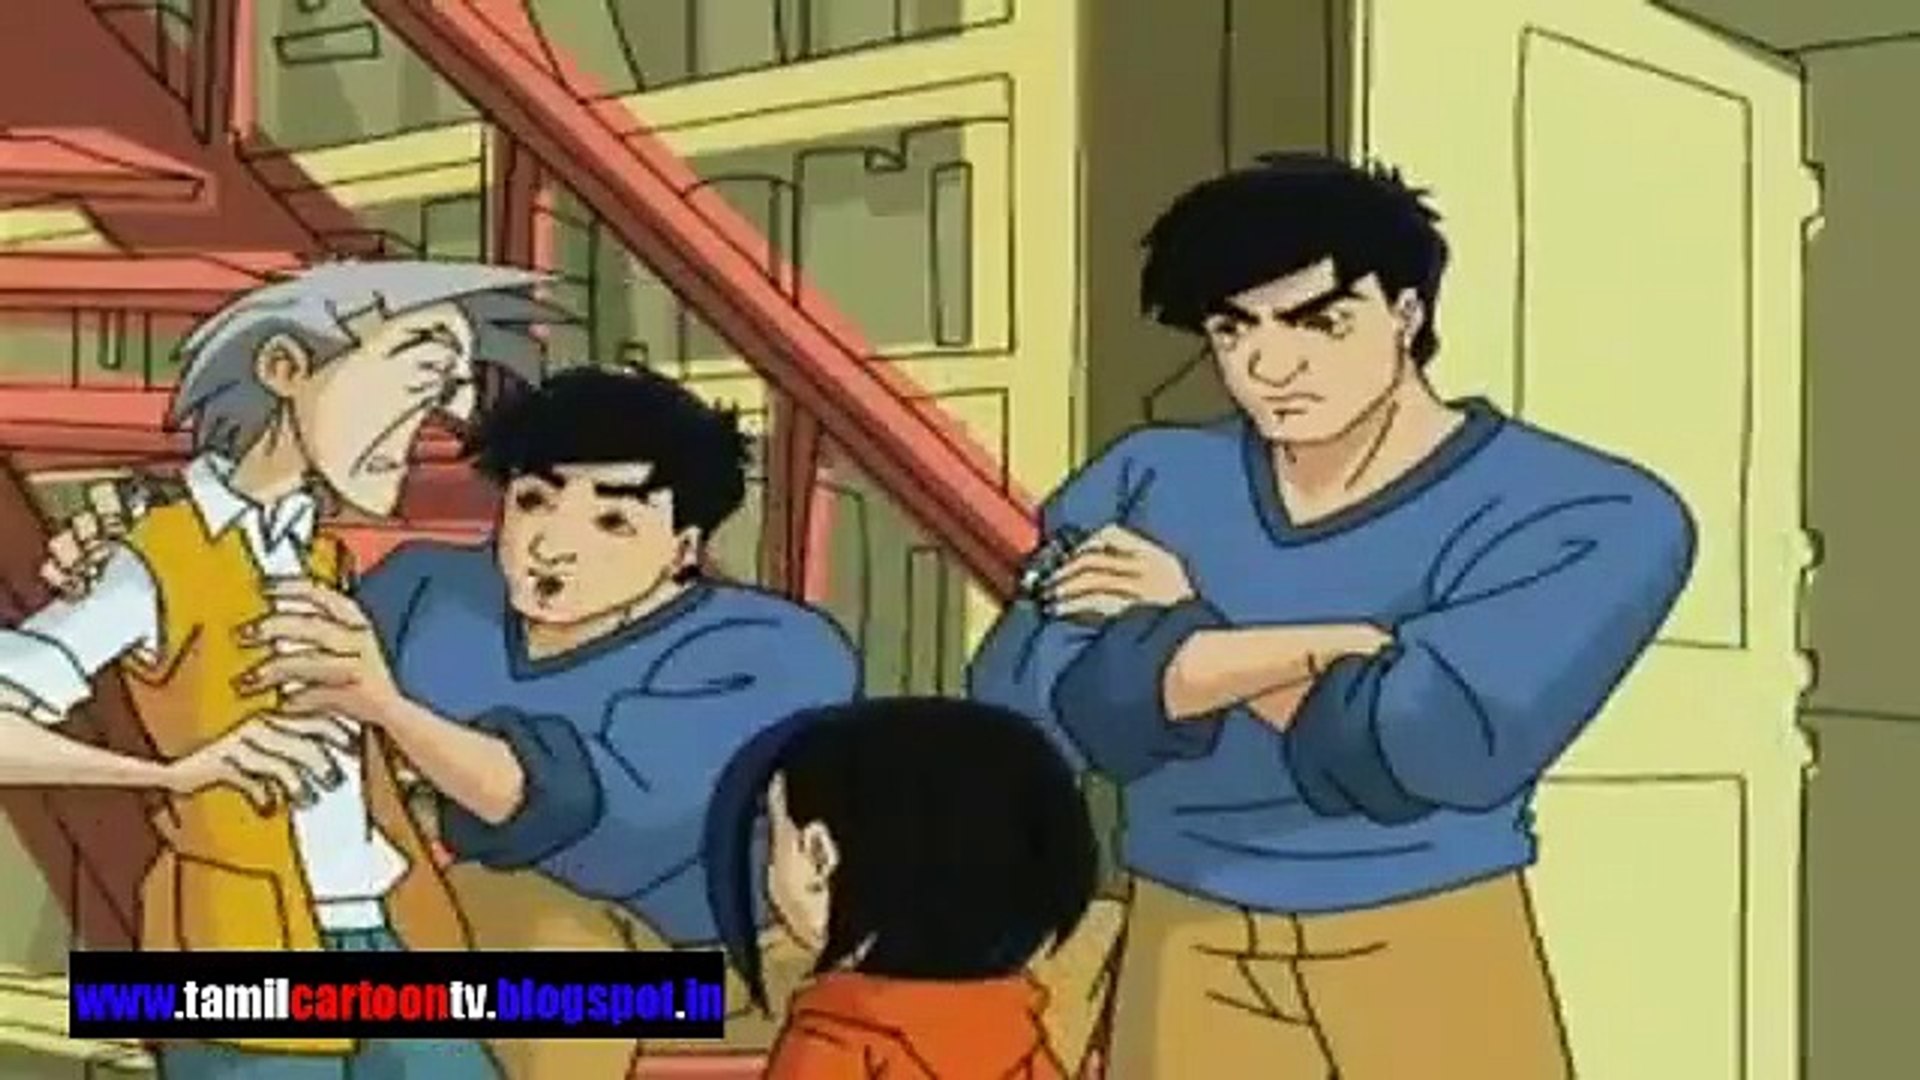 Adventures of jackie chan in tamil-Jackie chan in tamil-Jackie Chan  Adventure in tamil -Season 1-Episode 12 - The Tiger and The Pussycat -  video Dailymotion